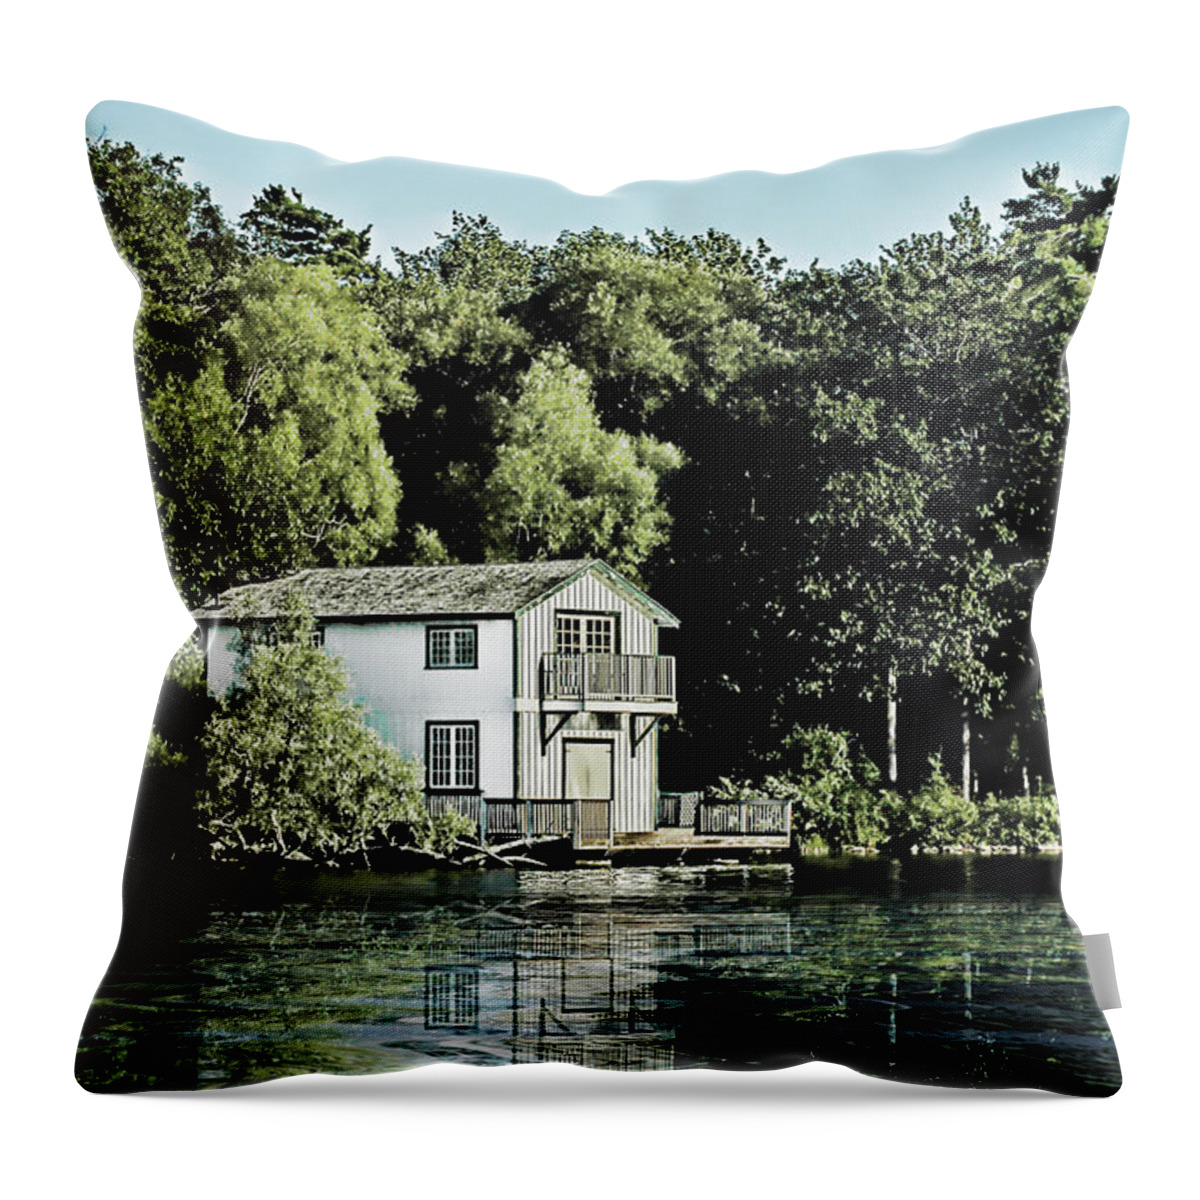 Orillia Throw Pillow featuring the digital art Leacock Boathouse by JGracey Stinson